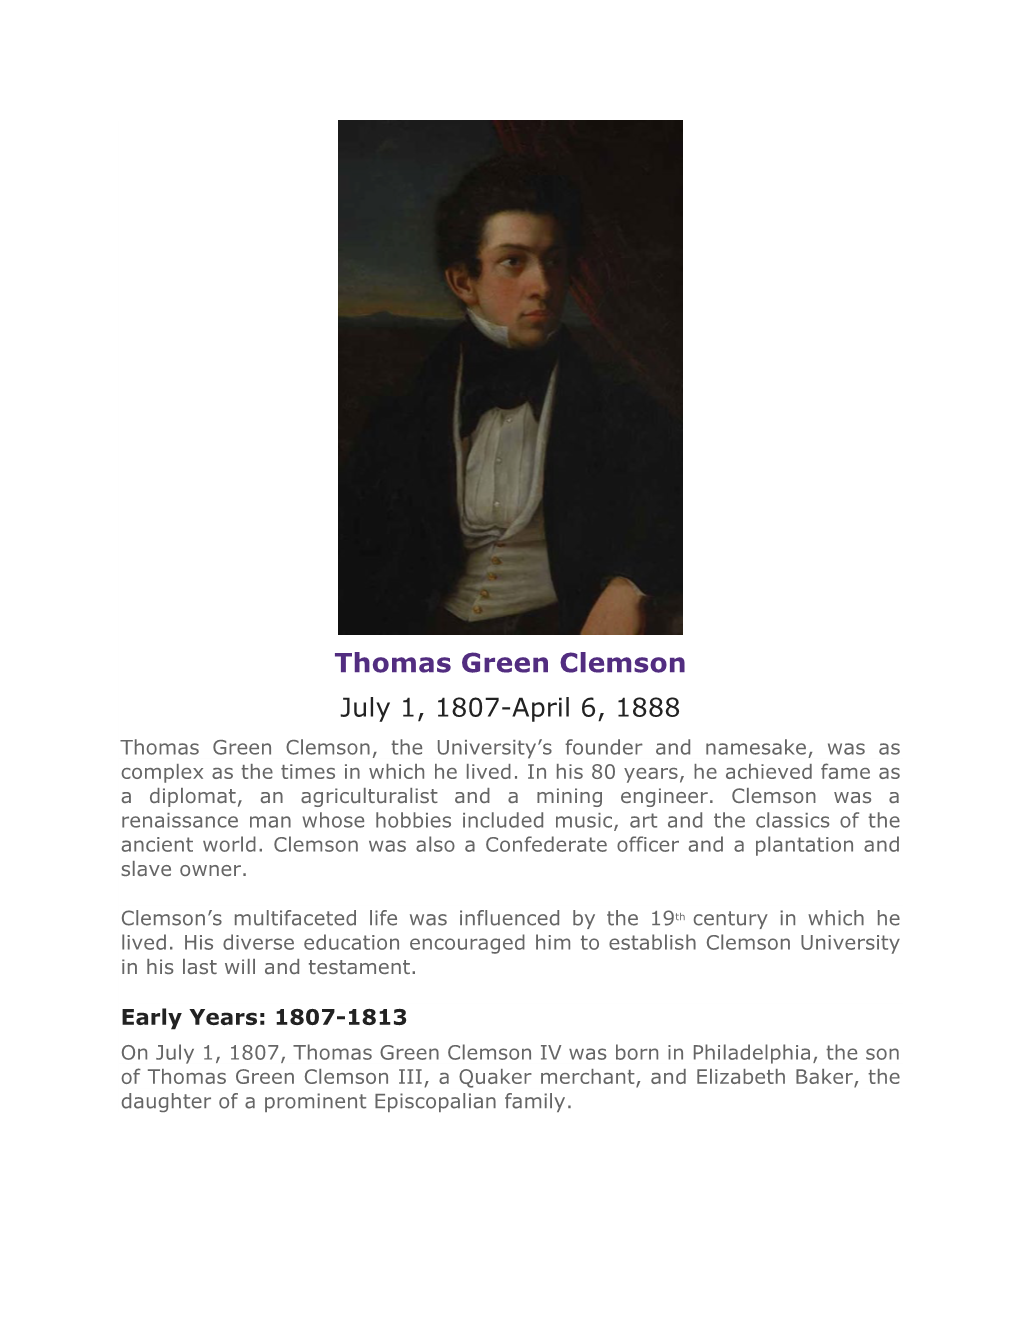 Thomas Green Clemson July 1, 1807-April 6, 1888 Thomas Green Clemson, the University’S Founder and Namesake, Was As Complex As the Times in Which He Lived